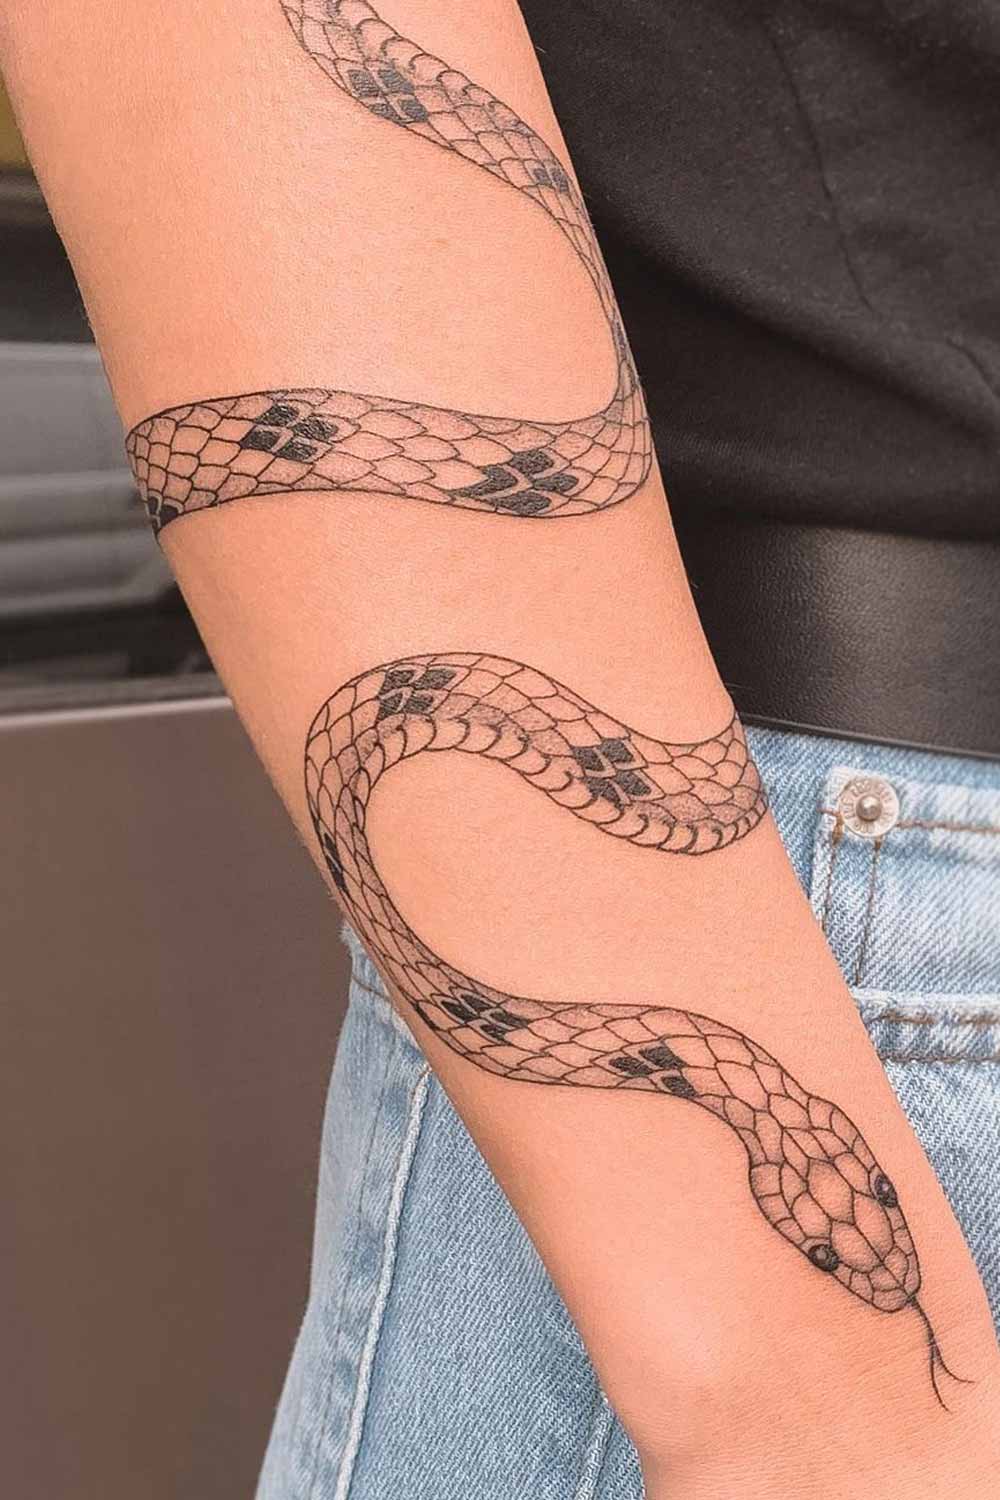 How to Care About Your Fresh Snake Tattoo